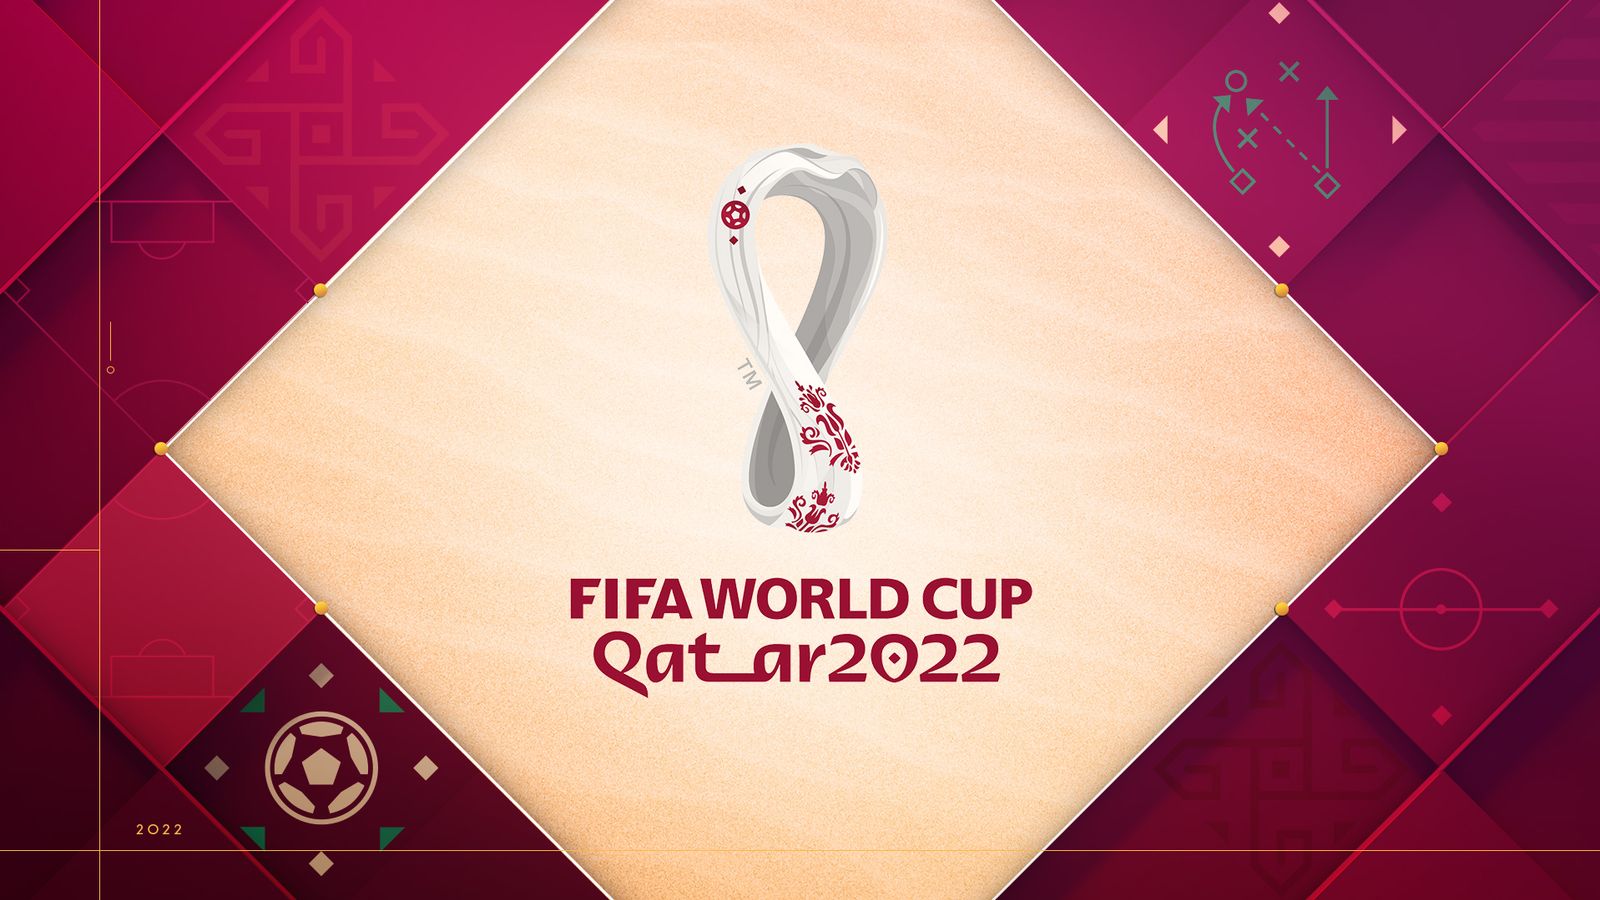 World Cup 2022 schedule, teams and draw thumbnail